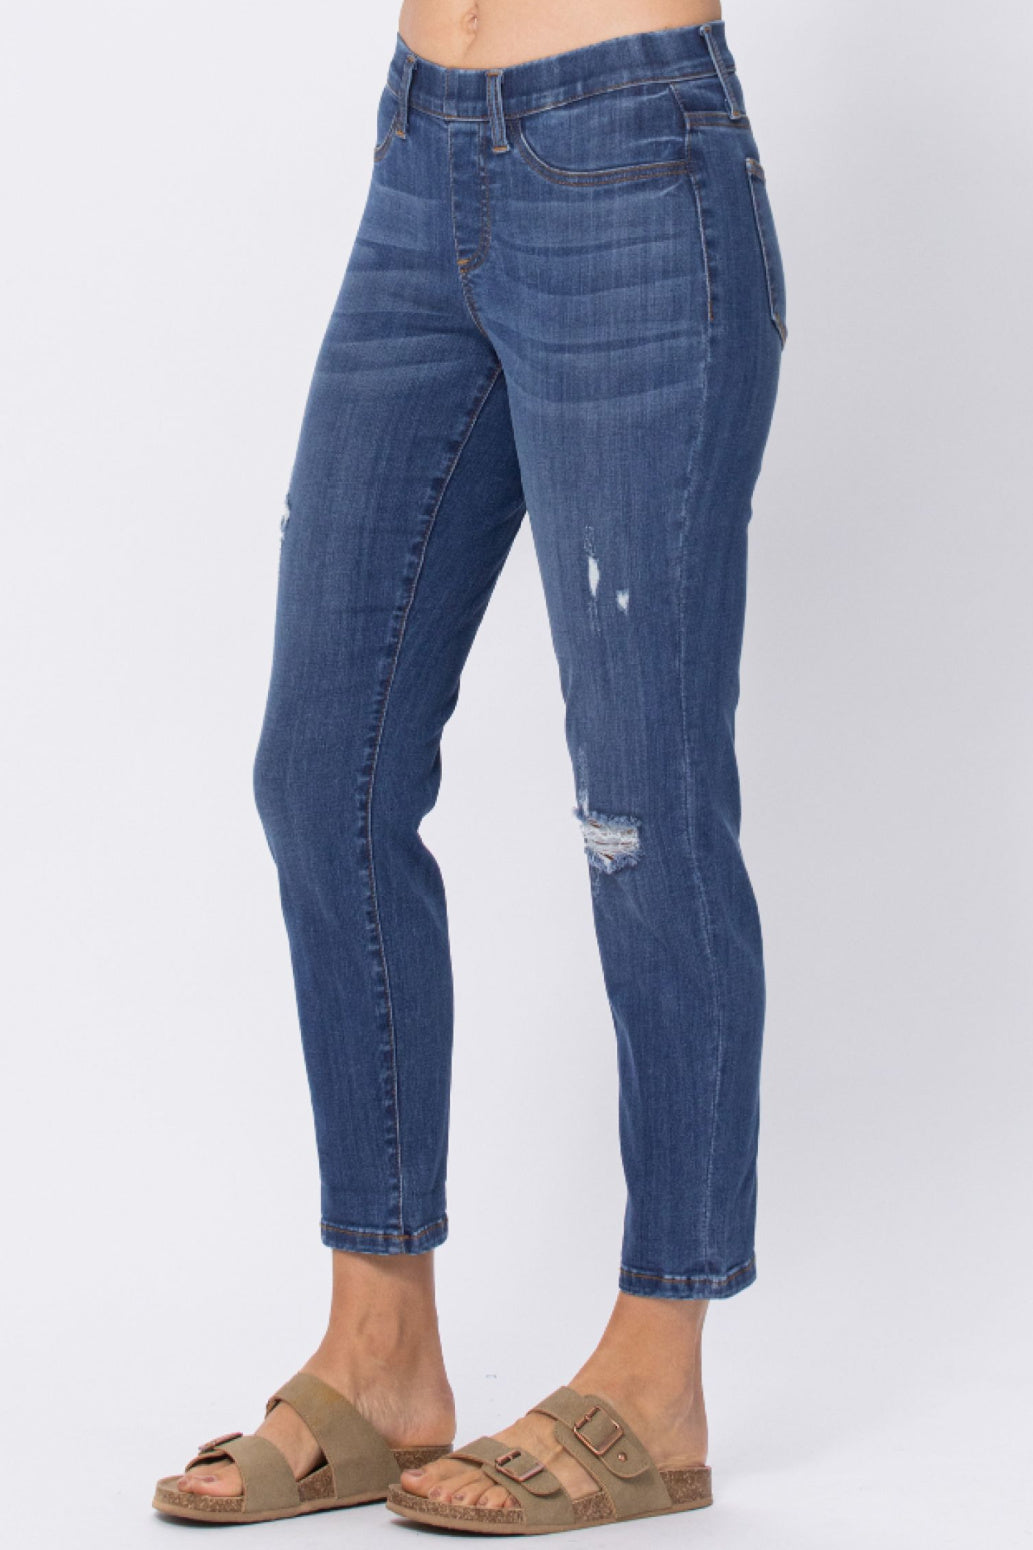 Judy Blue Pull-On Destroyed Boyfriend Jeggings Style 88369